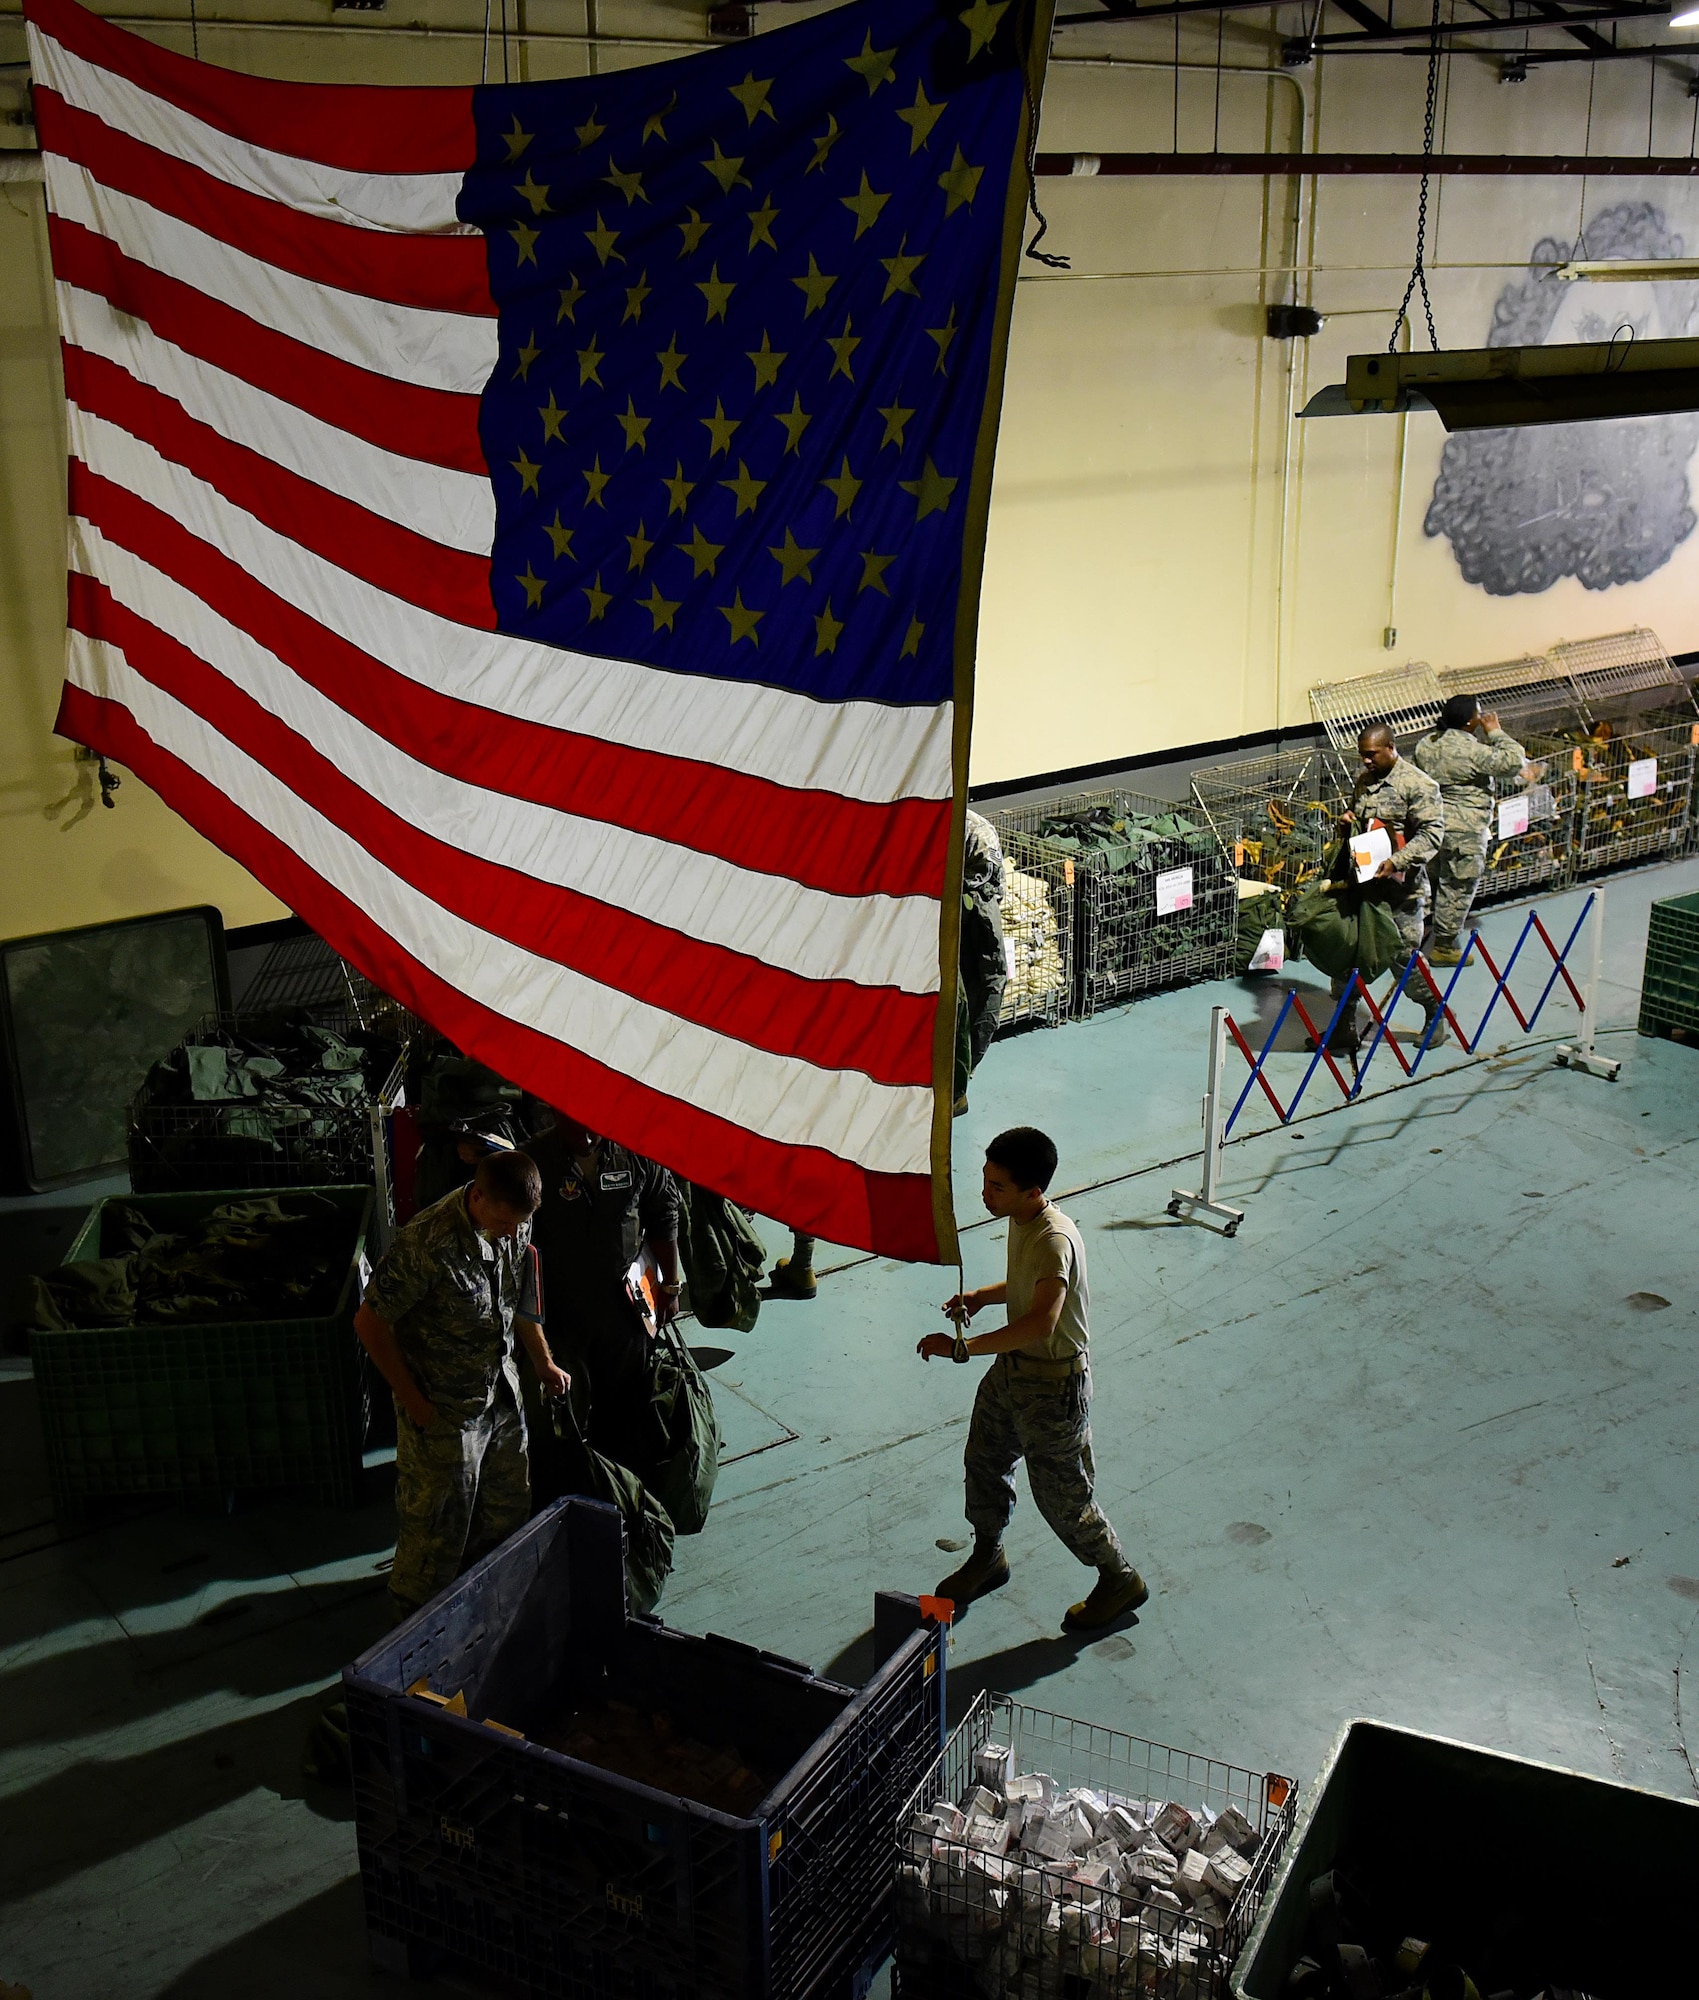 In order to ensure the 4th Fighter Wing is adequately prepared to meet the U.S. Air Force’s maximum readiness standards, the wing conducted a planned, no-notice mission assurance exercise July 19-21, 2017, at Seymour Johnson Air Force Base, North Carolina. The exercise scenario, Thunderdome 17-02, tested the wings ability to conduct a necessary rapid and appropriate response without any prior coordination. (U.S. Air Force photo by Airman 1st Class Kenneth Boyton)